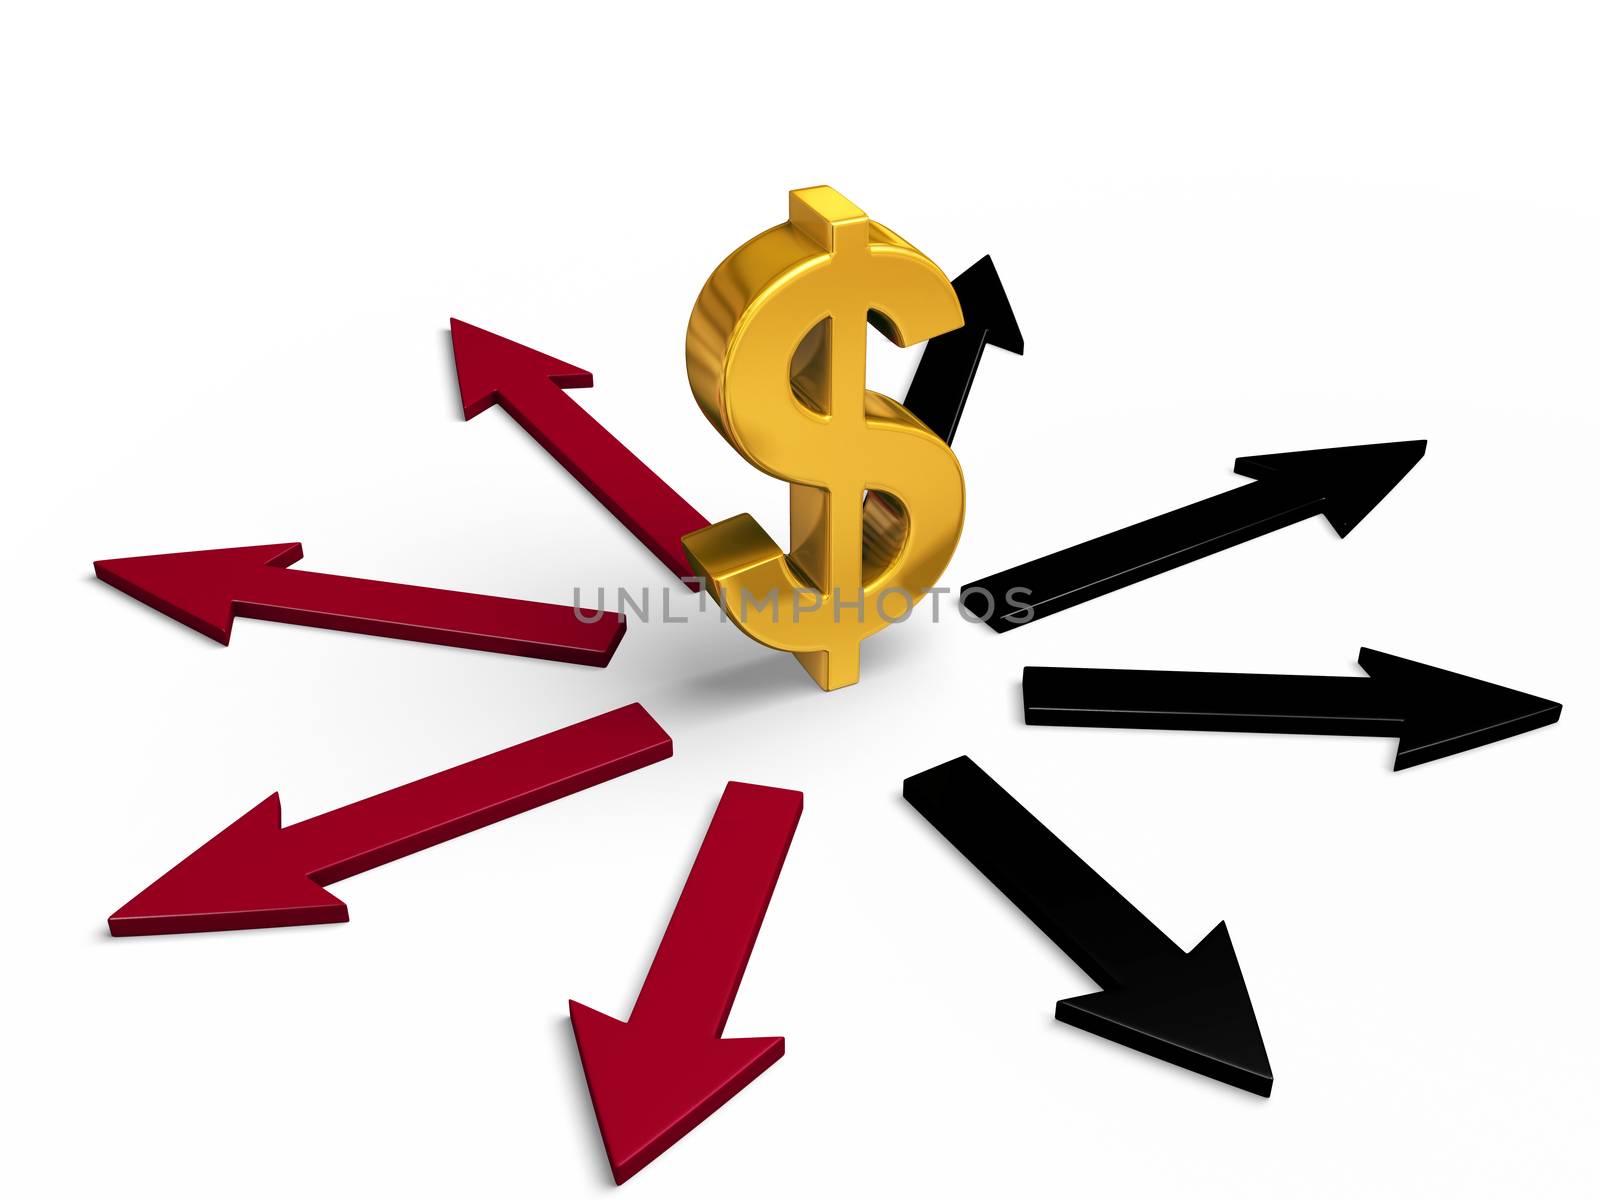 A bright, gold dollar sign stands in center of black and red arrows pointing in different directions.  Red arrows point to losses, black arrows to gains.  Isolated on white.
